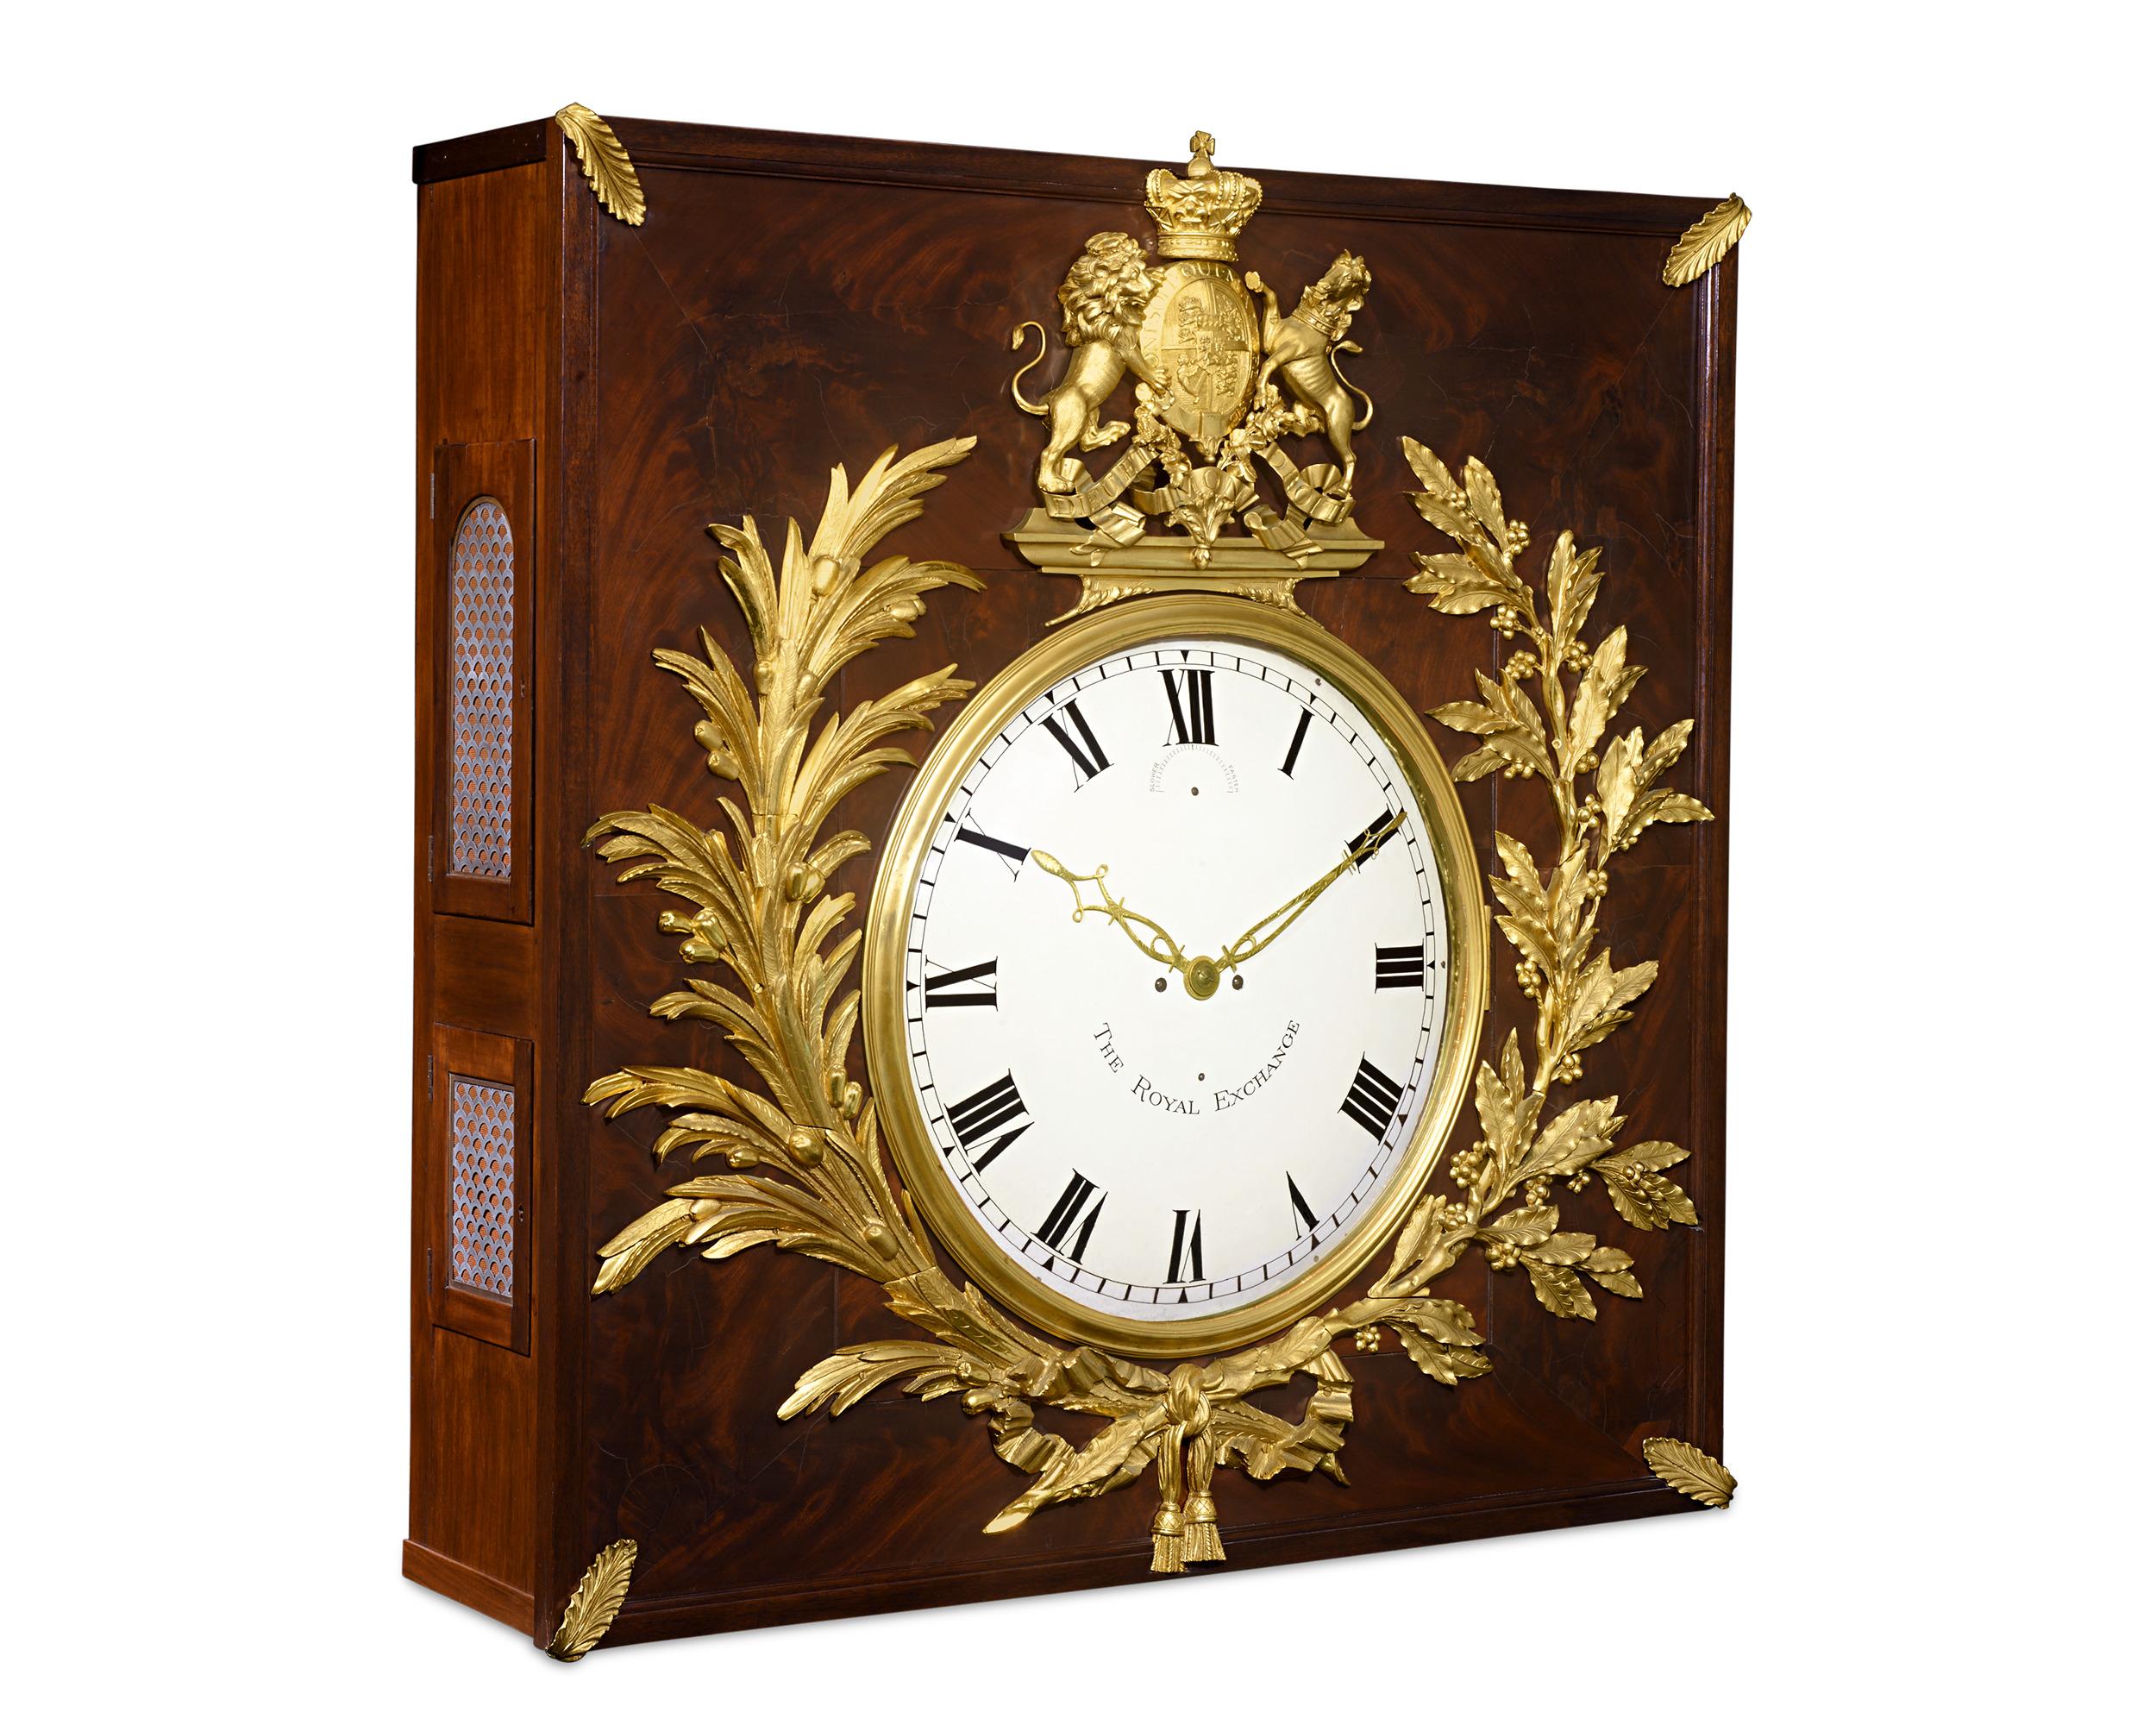 Undoubtedly one of the finest creations of the renowned Brockbank brothers clockmakers, this extraordinary early 19th-century Georgian grand wall clock was crafted for display at the Royal Exchange, London's famed stock trading floor. The grand